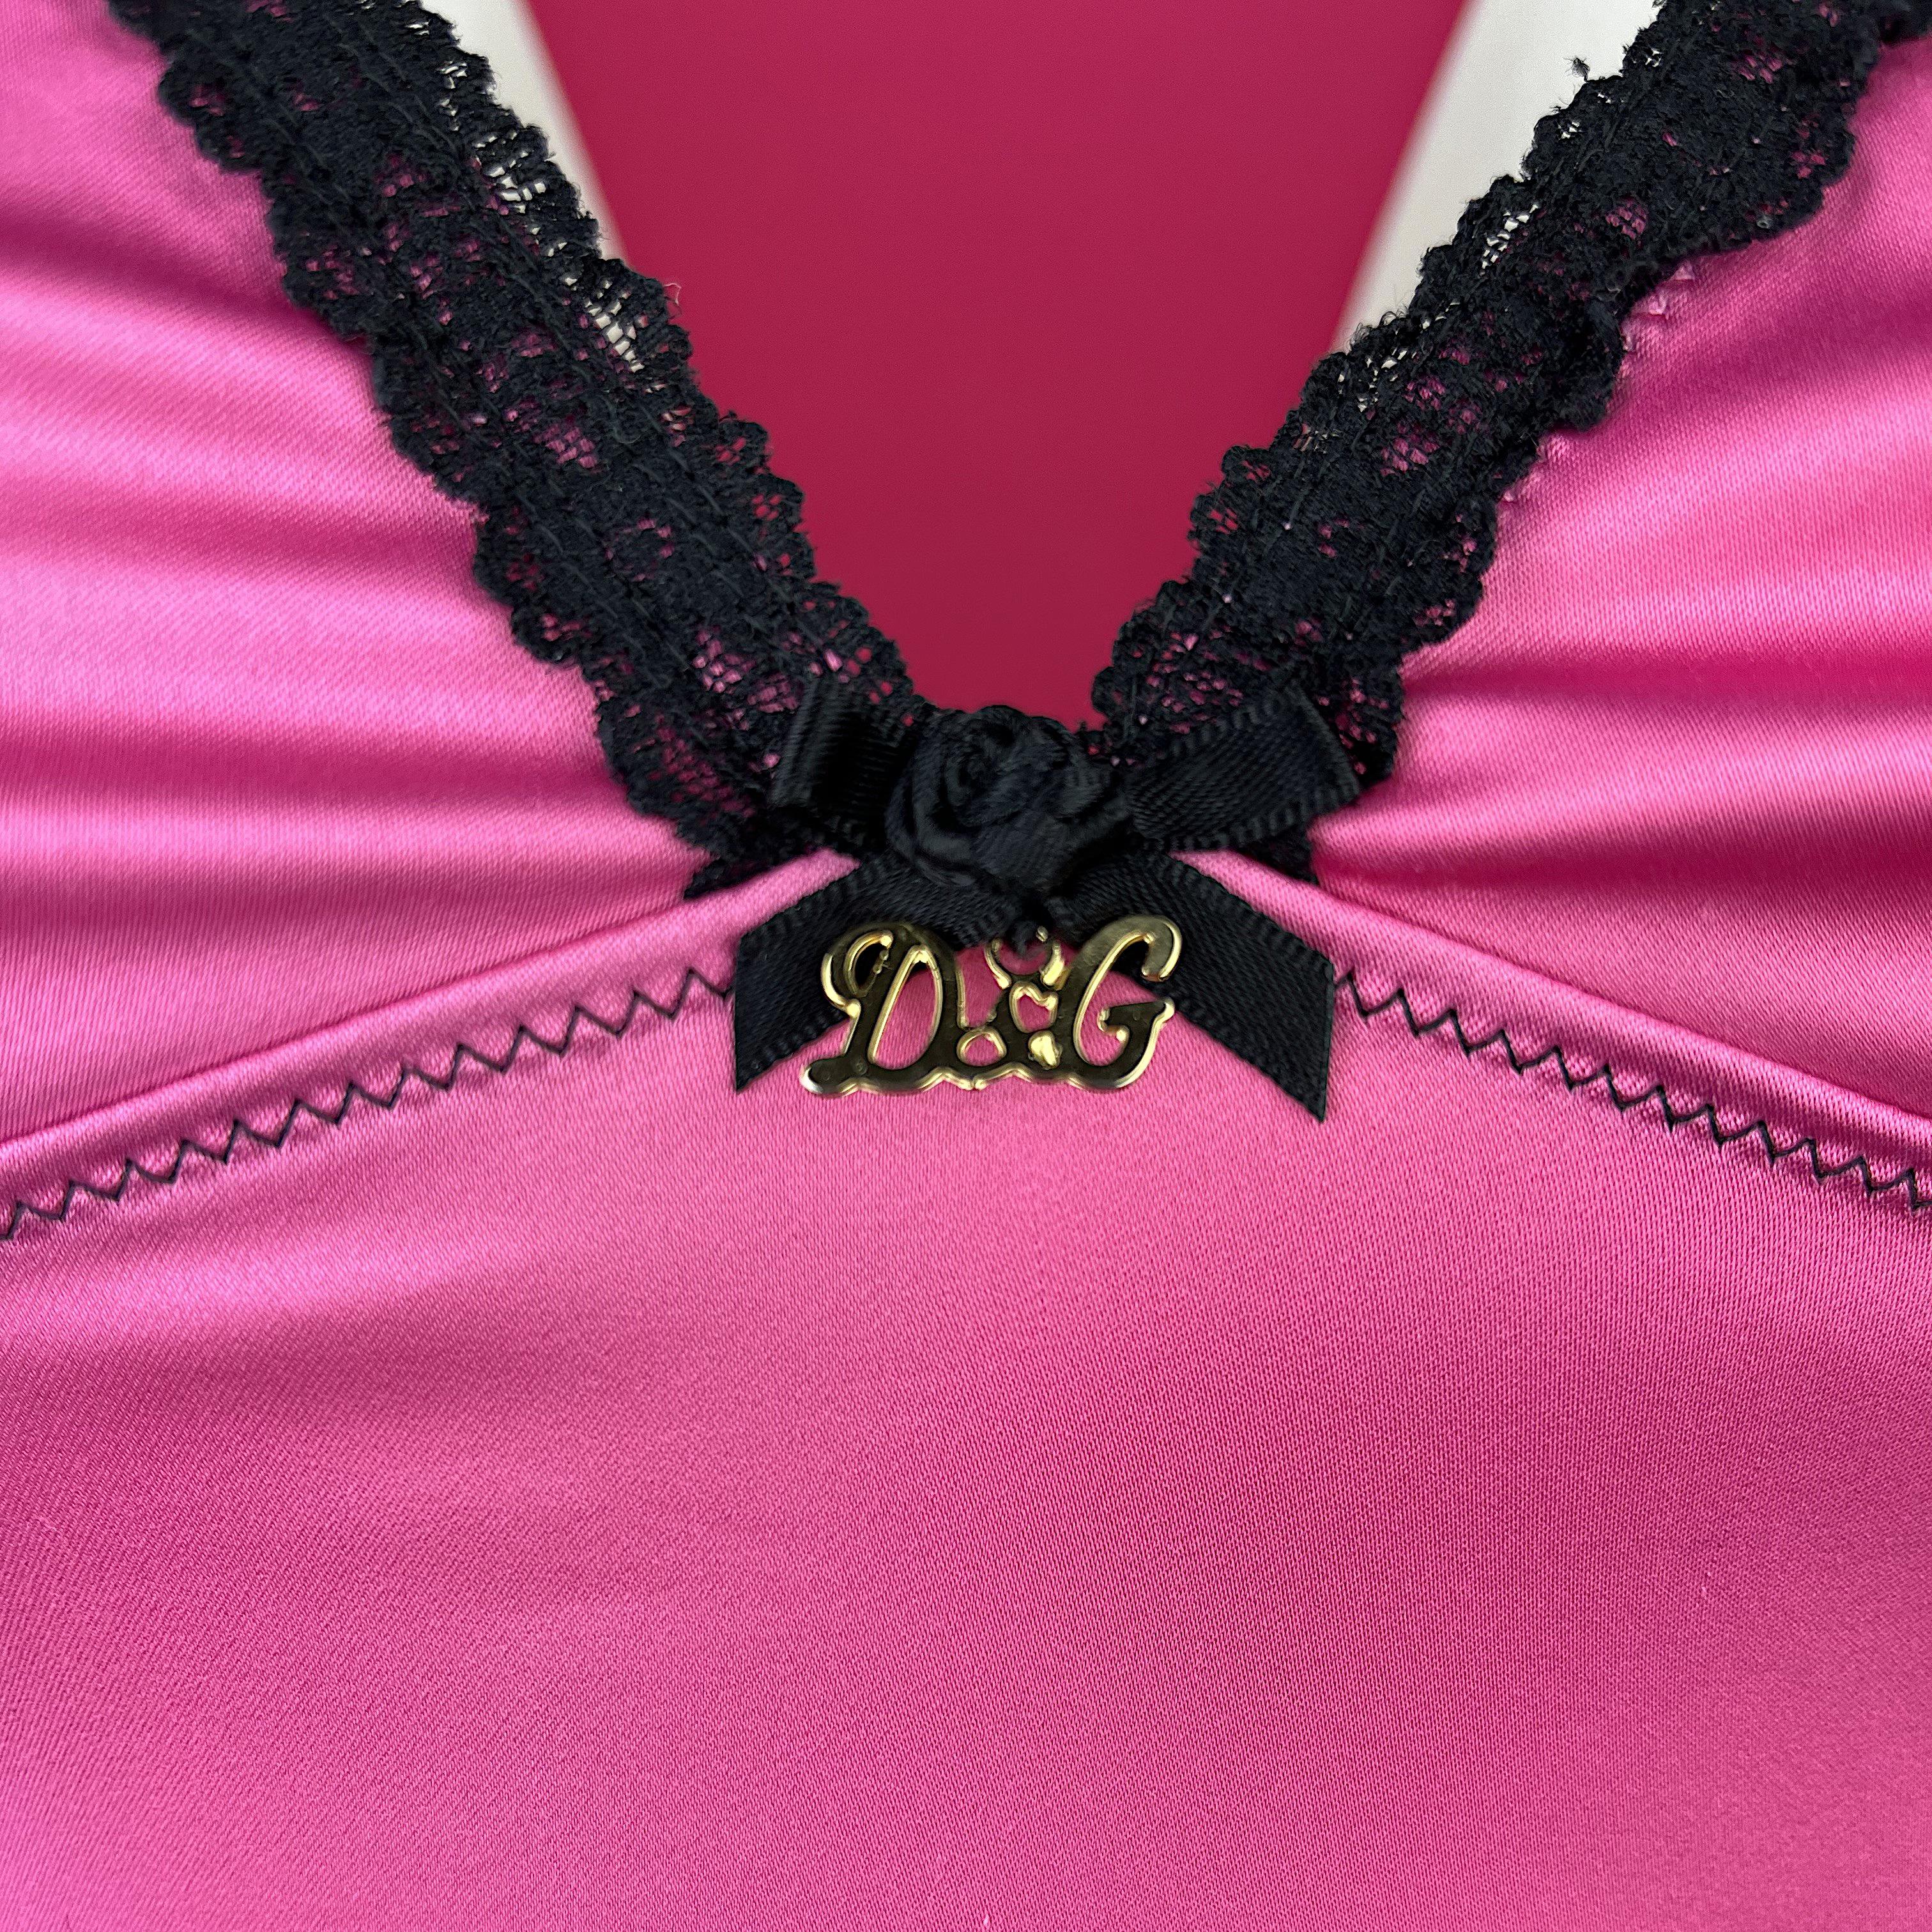 DOLCE&GABBANA – Authentic Sexy Pink Tank Top with Black Lace and Golden Monogram 1